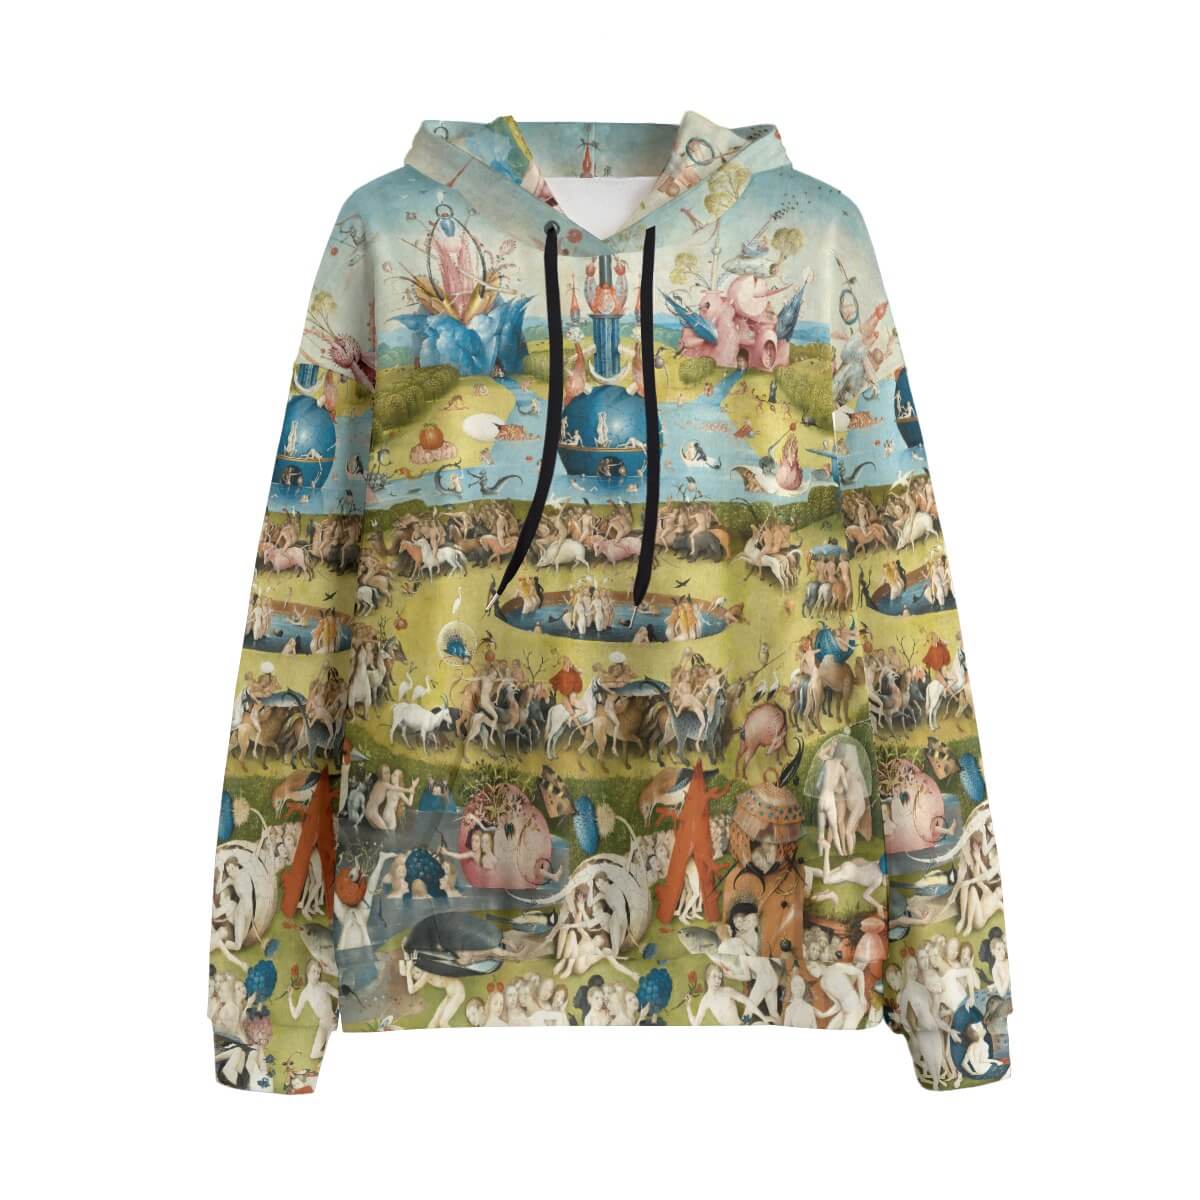 Hieronymus Bosch Earthly Delights Hoodie